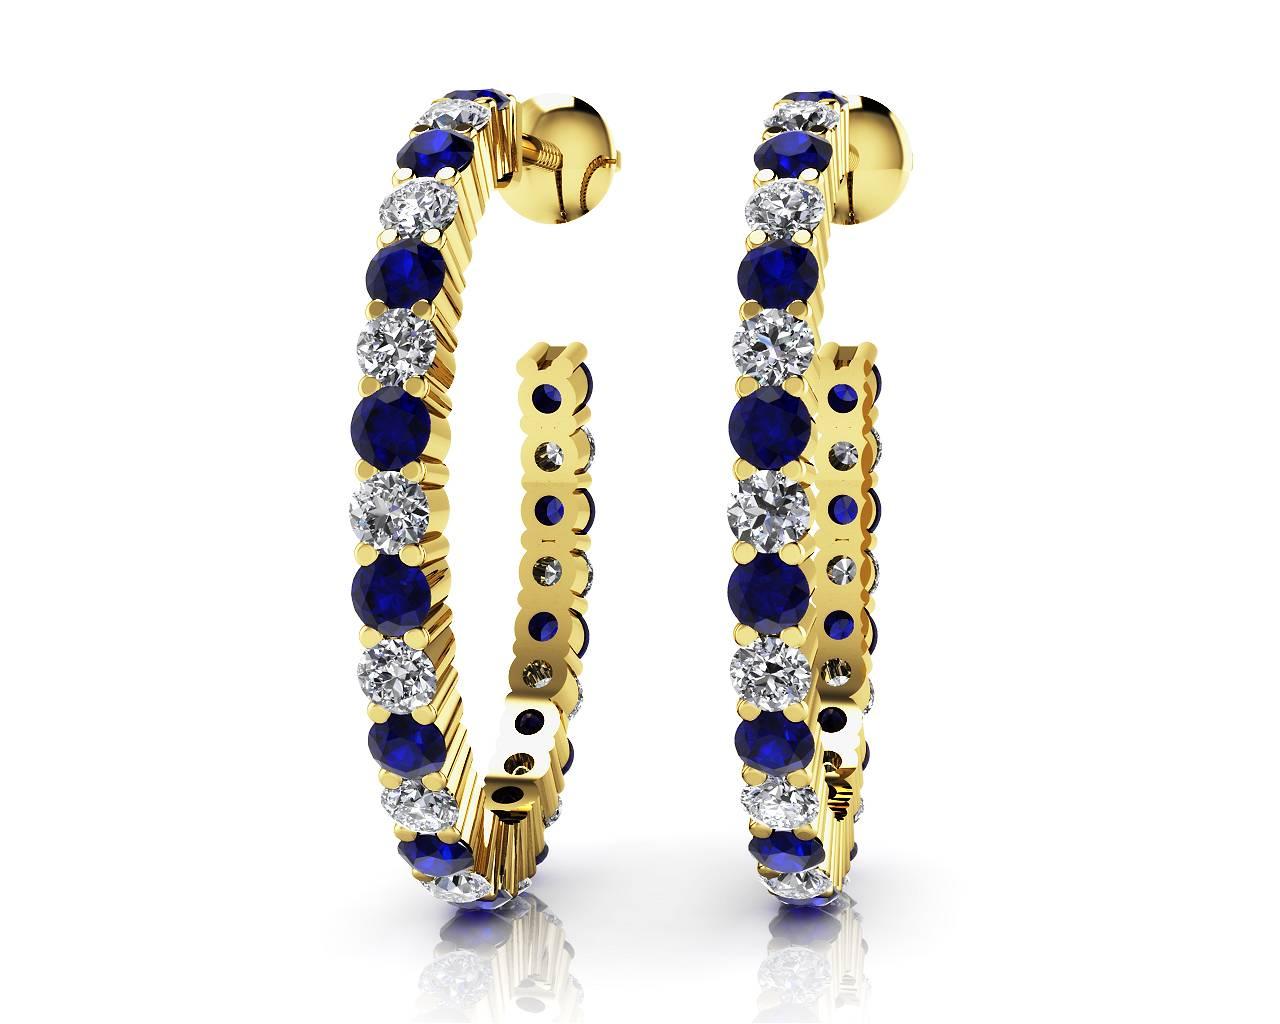 Deep Rich blue ceylon sapphires and excellent diamonds were set to make these Platinum earrings! 

Approx total weight: 1.50cts
Diamond Color: E-F
Diamond Clarity: Vs 
Cut: Excellent 

All Emilio! pieces come with a professional appraisal from GAL,